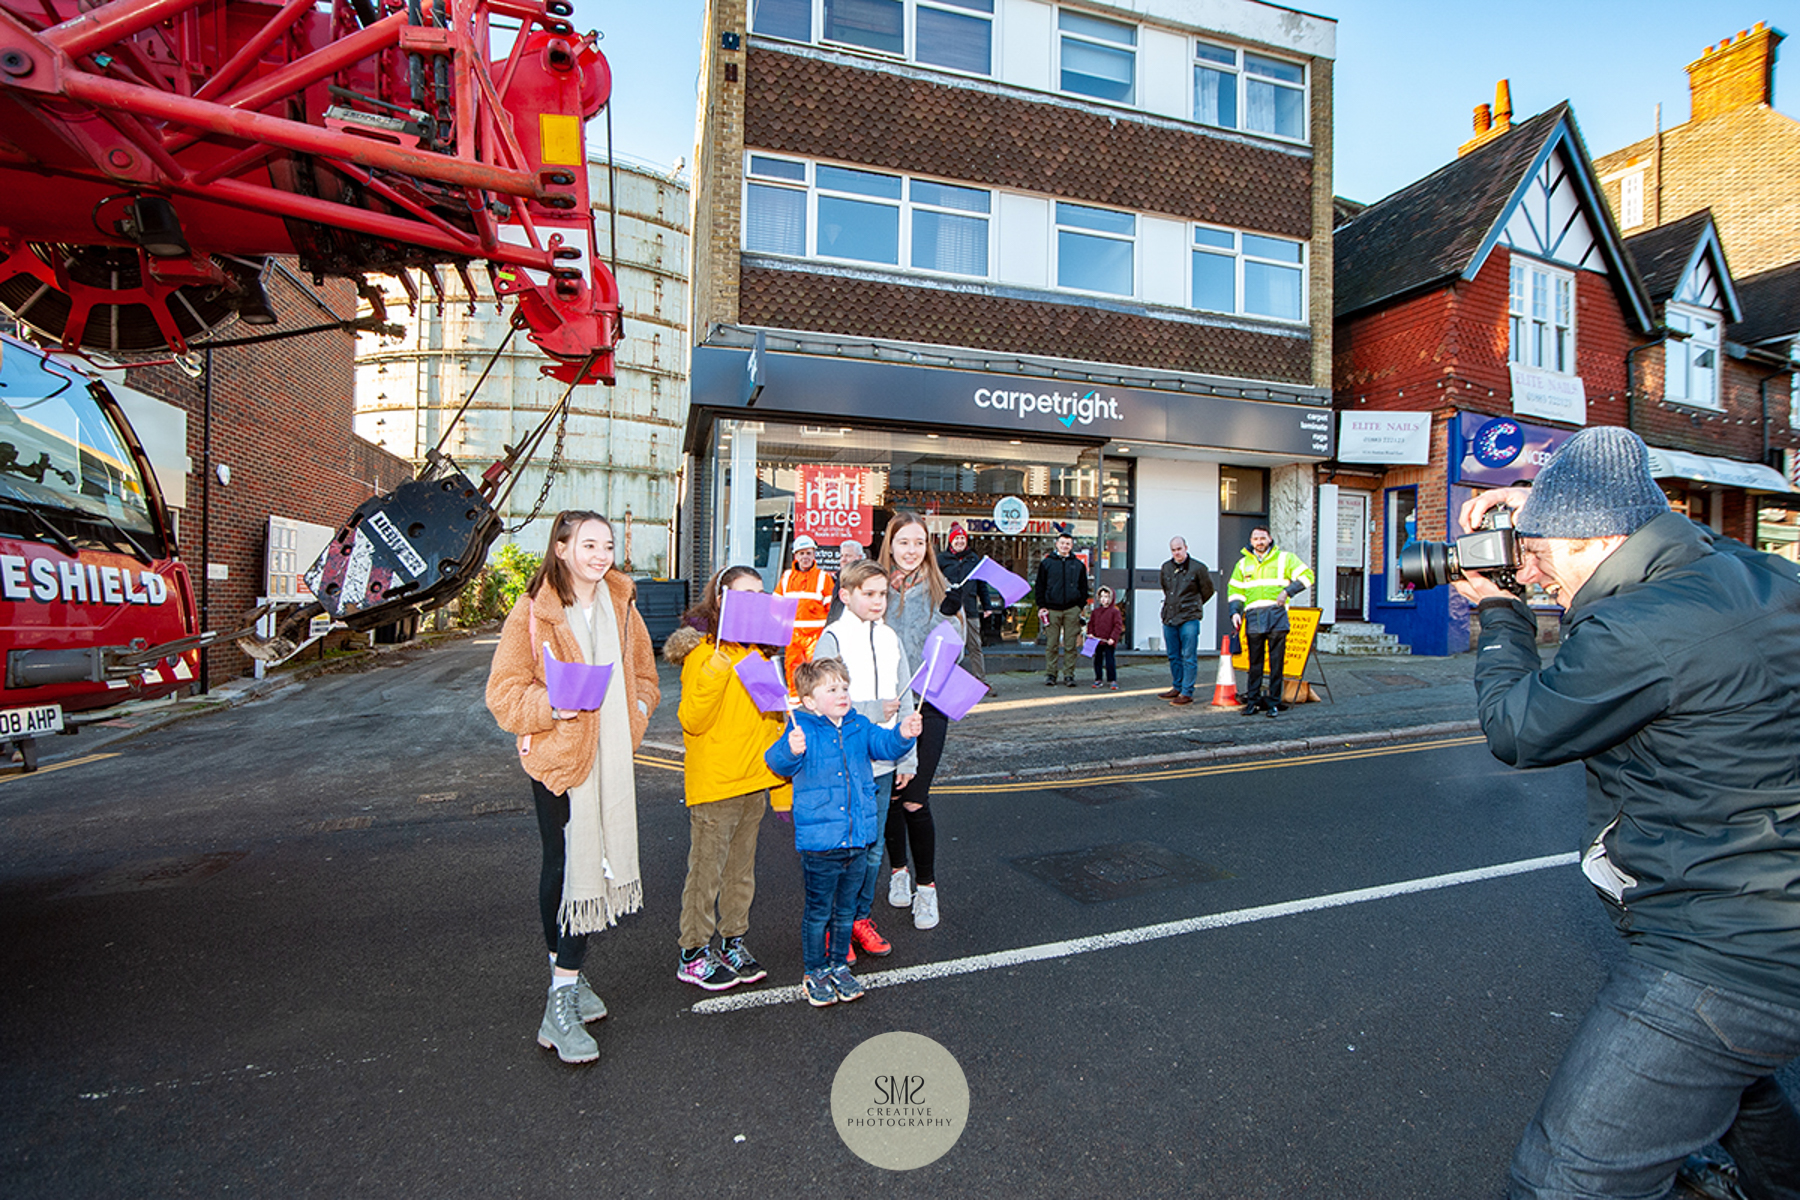 Local children pose for photographs waving purple Oxted Regen flags to witness the arrival of the crane. 